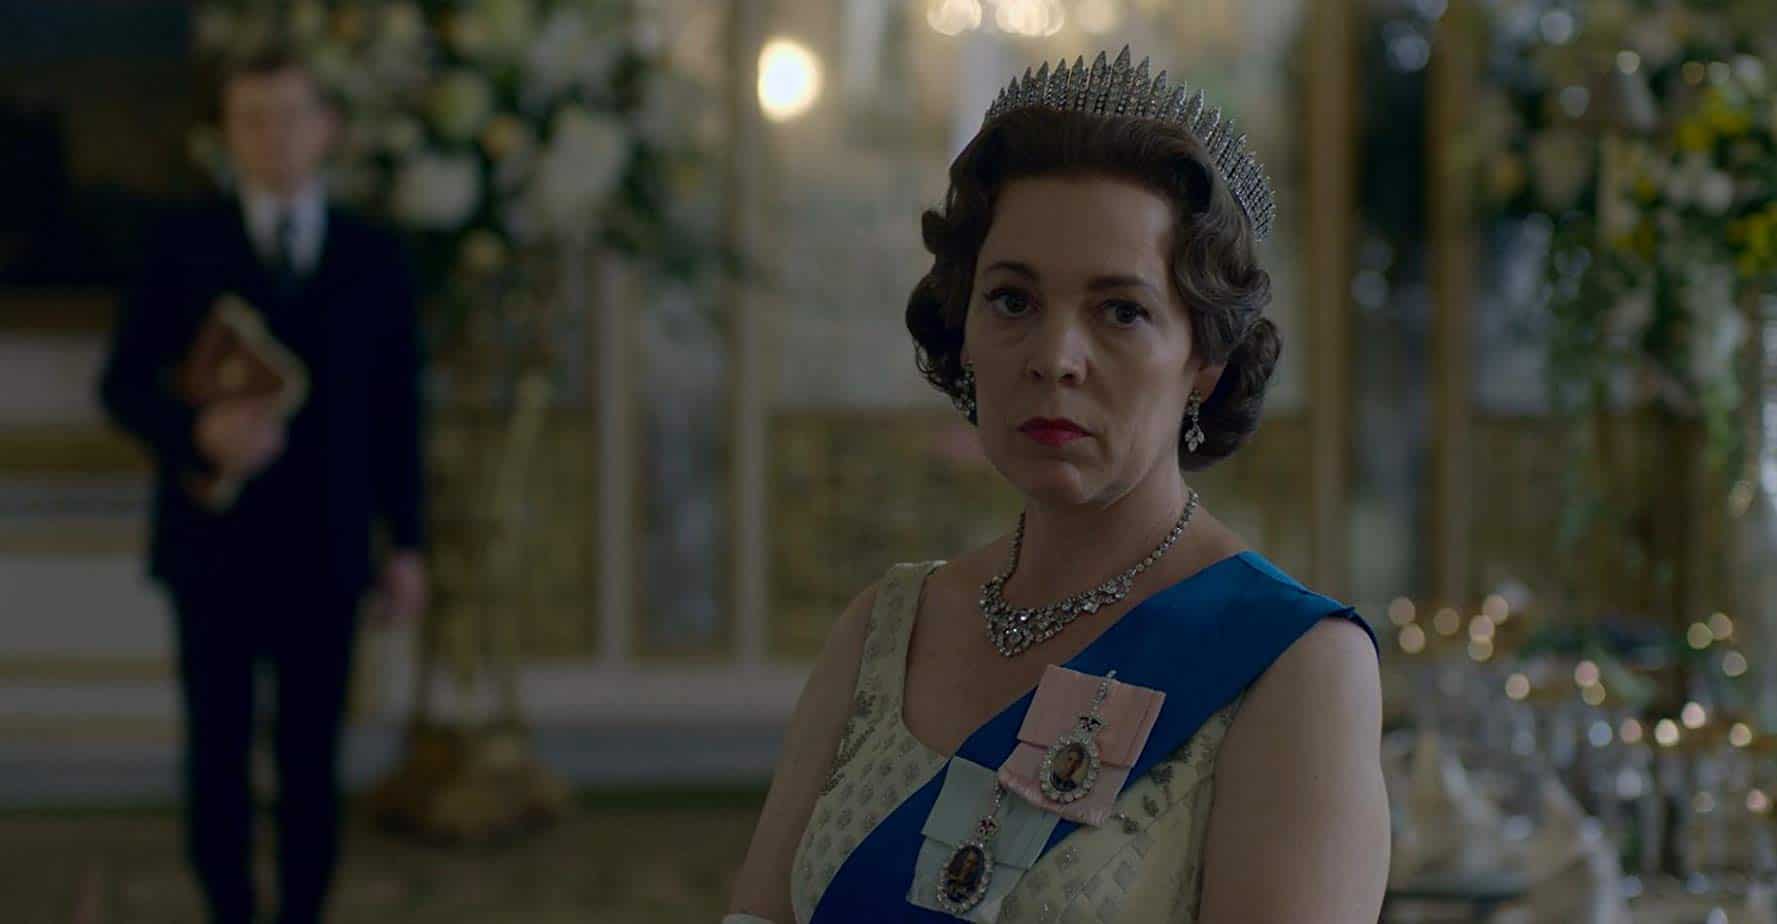 Review of “The Crown”, Season 3